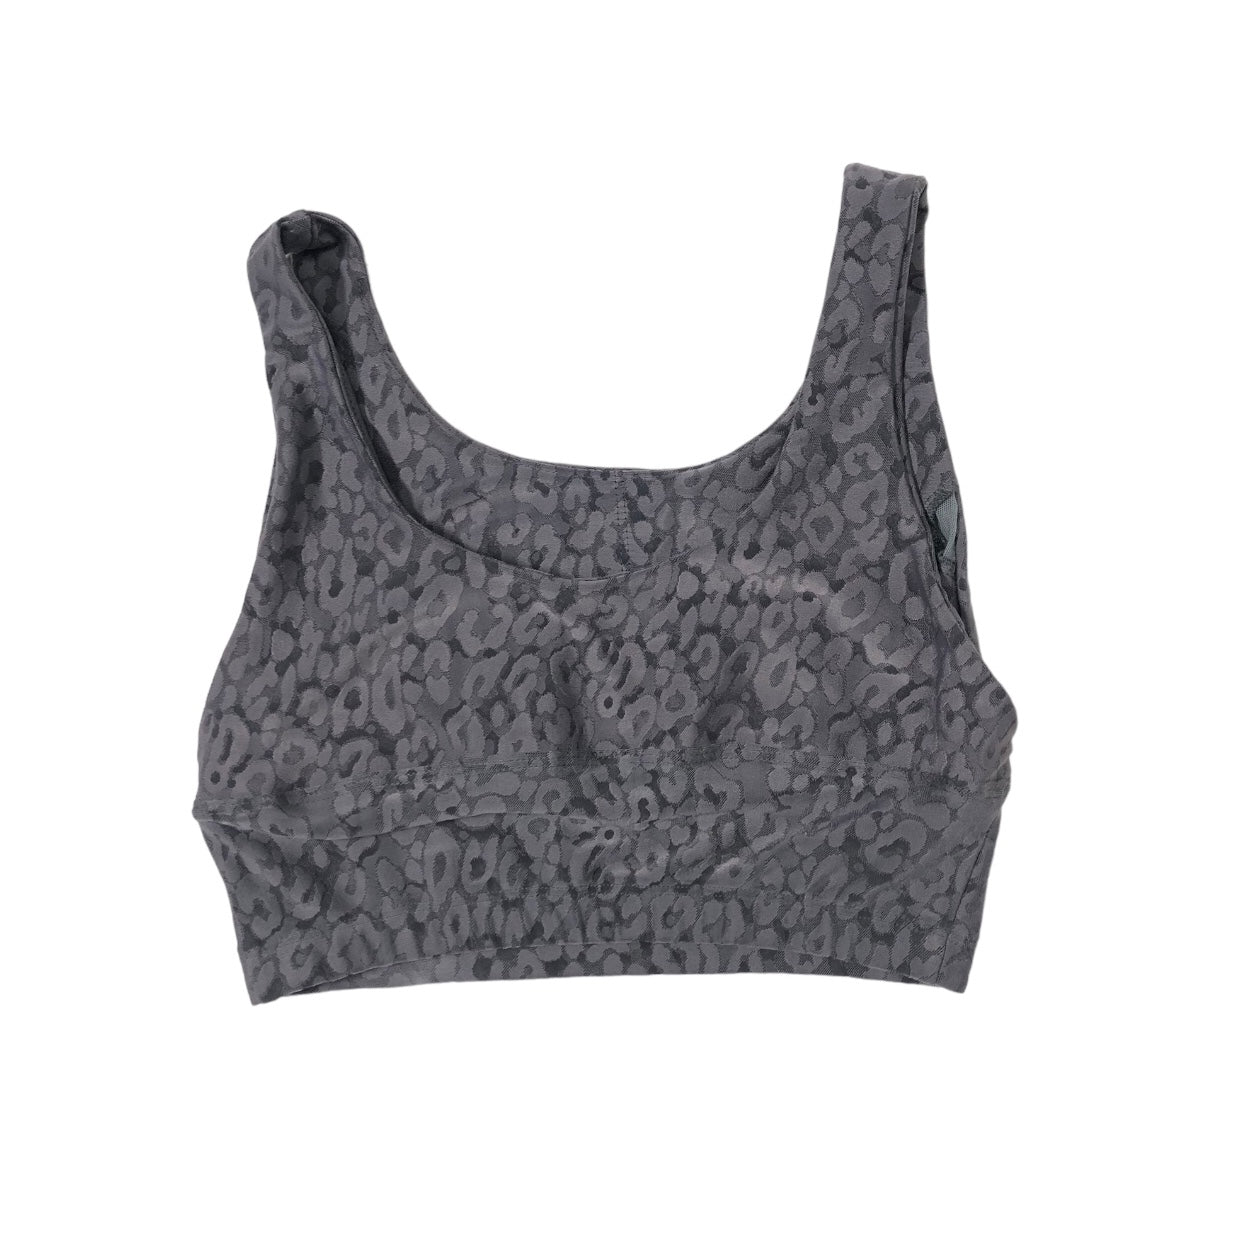 Grey Athletic Bra Clothes Mentor, Size M